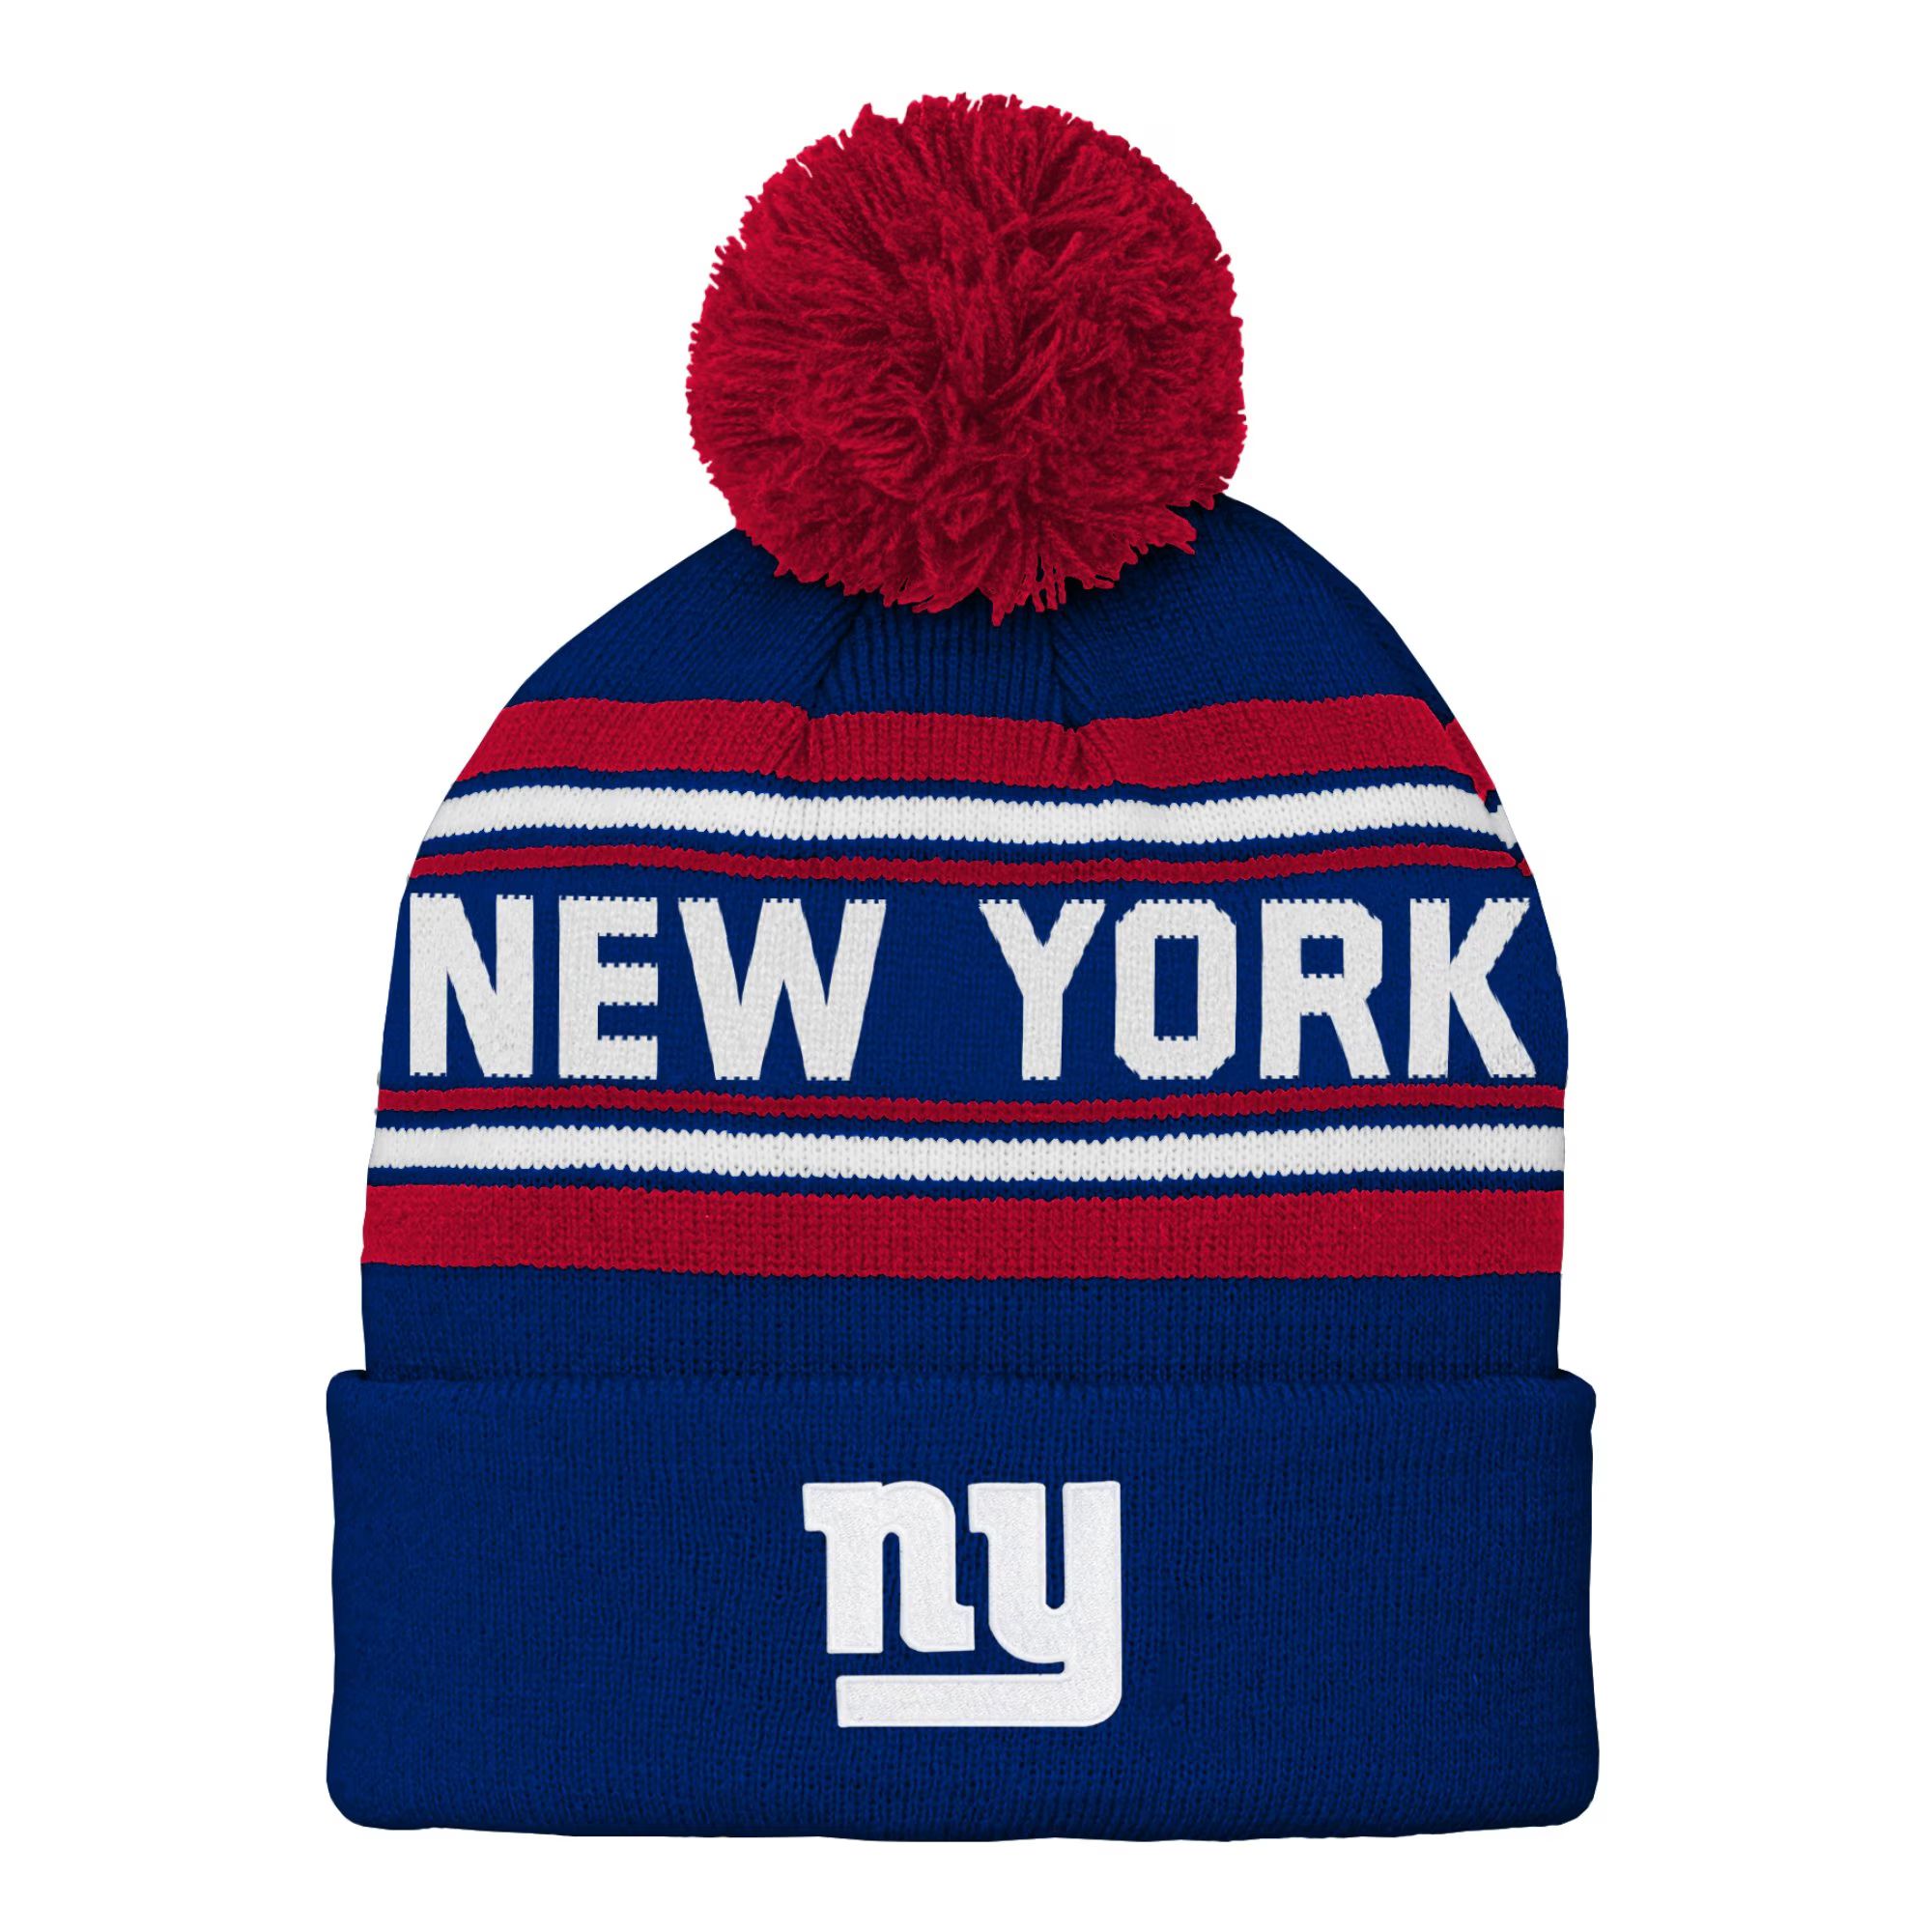 Youth New York Giants Royal Jacquard Cuffed Knit Hat with Pom | NFL Shop